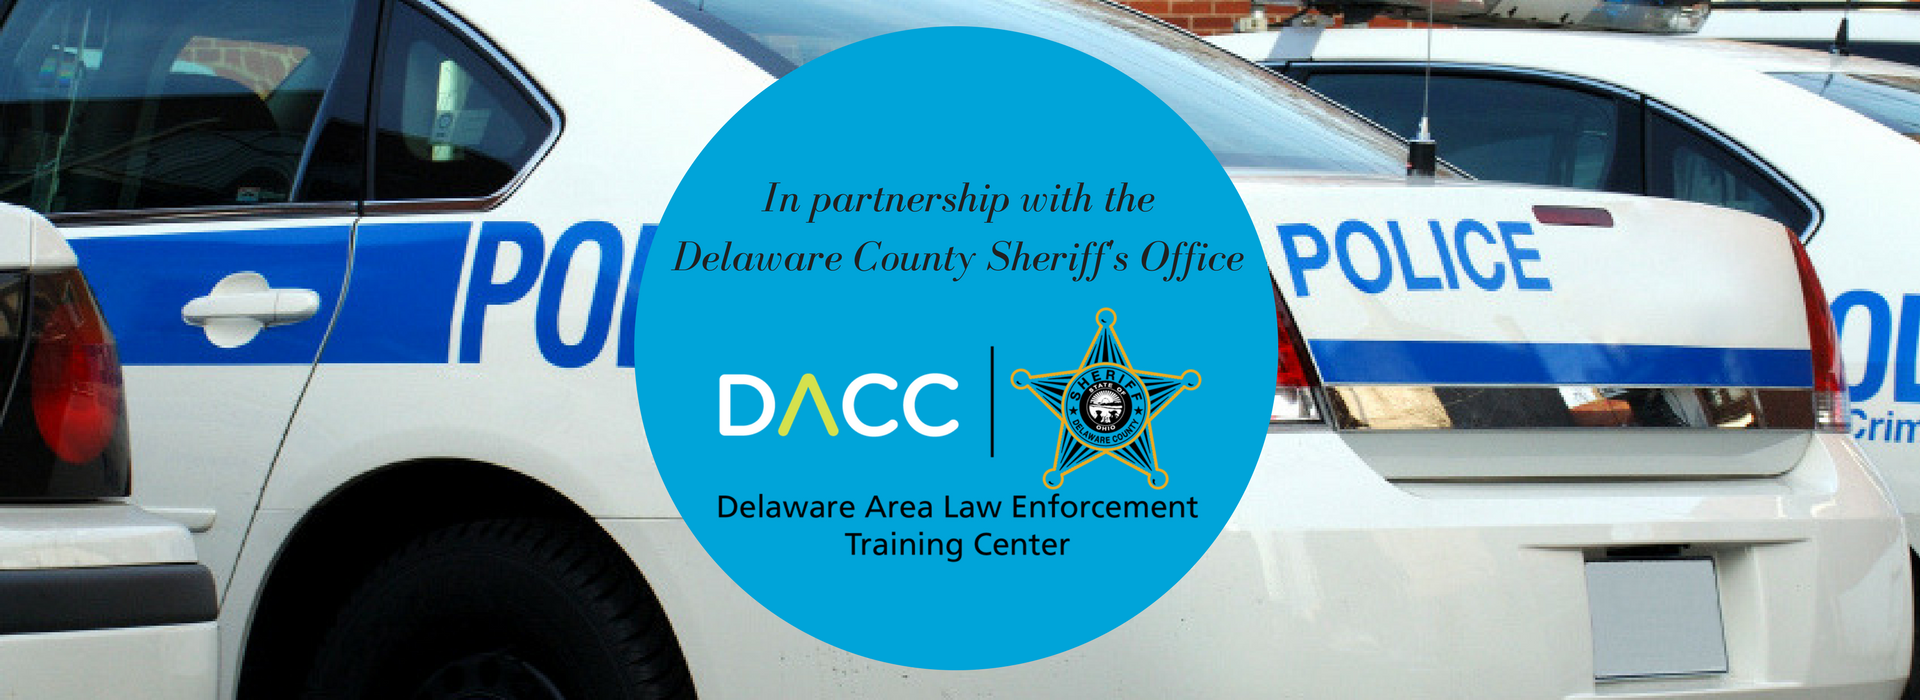 In partnership with Delaware County Sheriff's Office